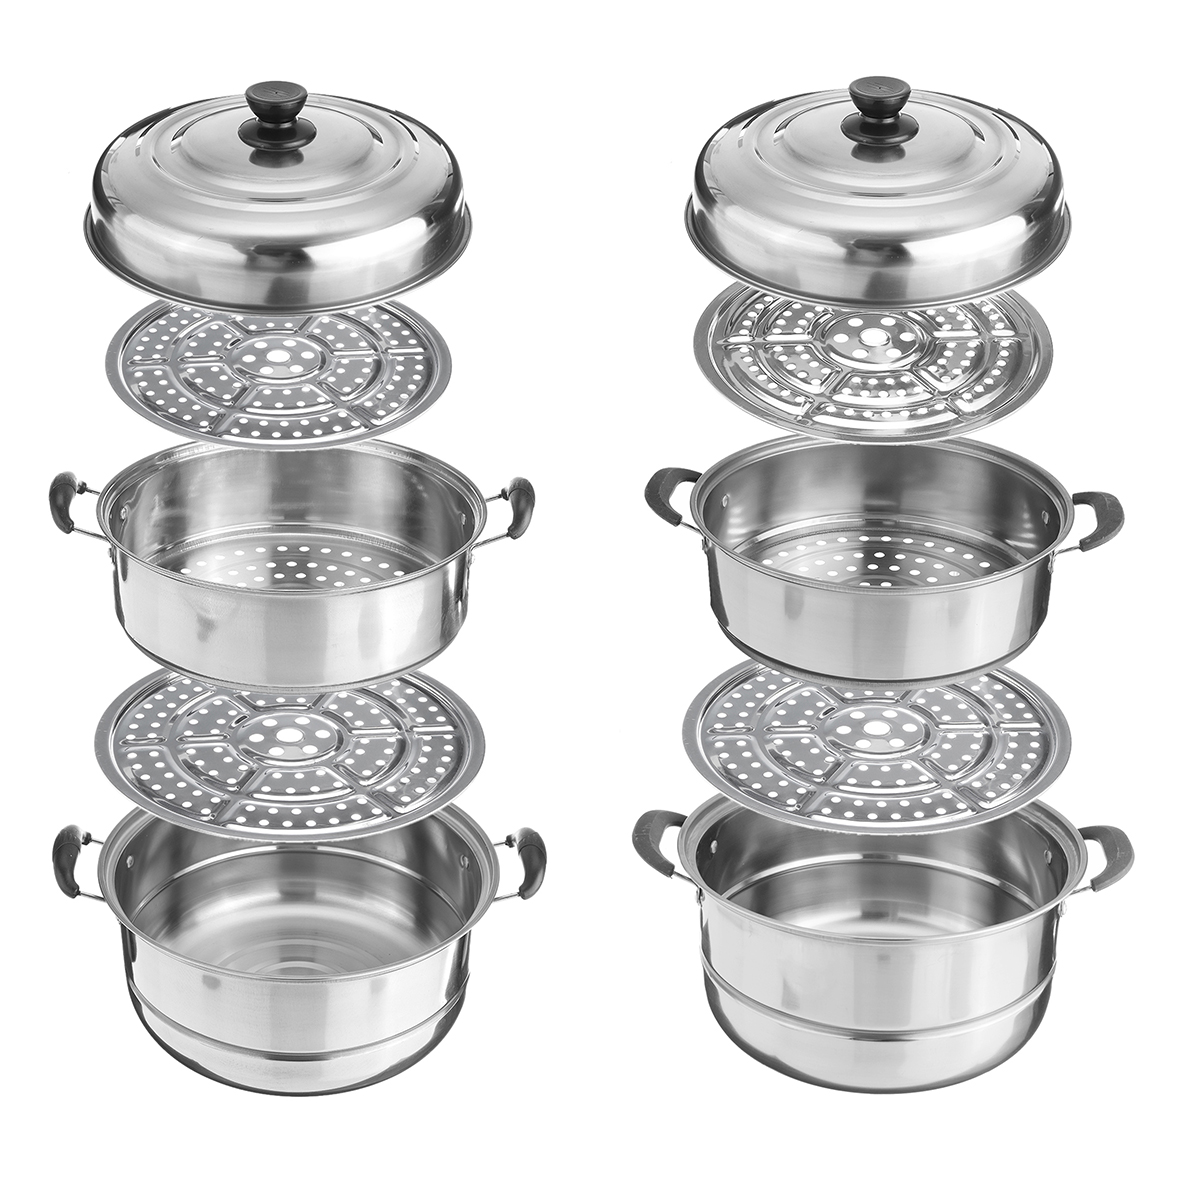 3-Tier-Stainless-Steel-Pot-Steamer-Steam-Cooking-Cooker-Cookware-Hot-Pot-Kitchen-Cooking-Tools-1672892-5